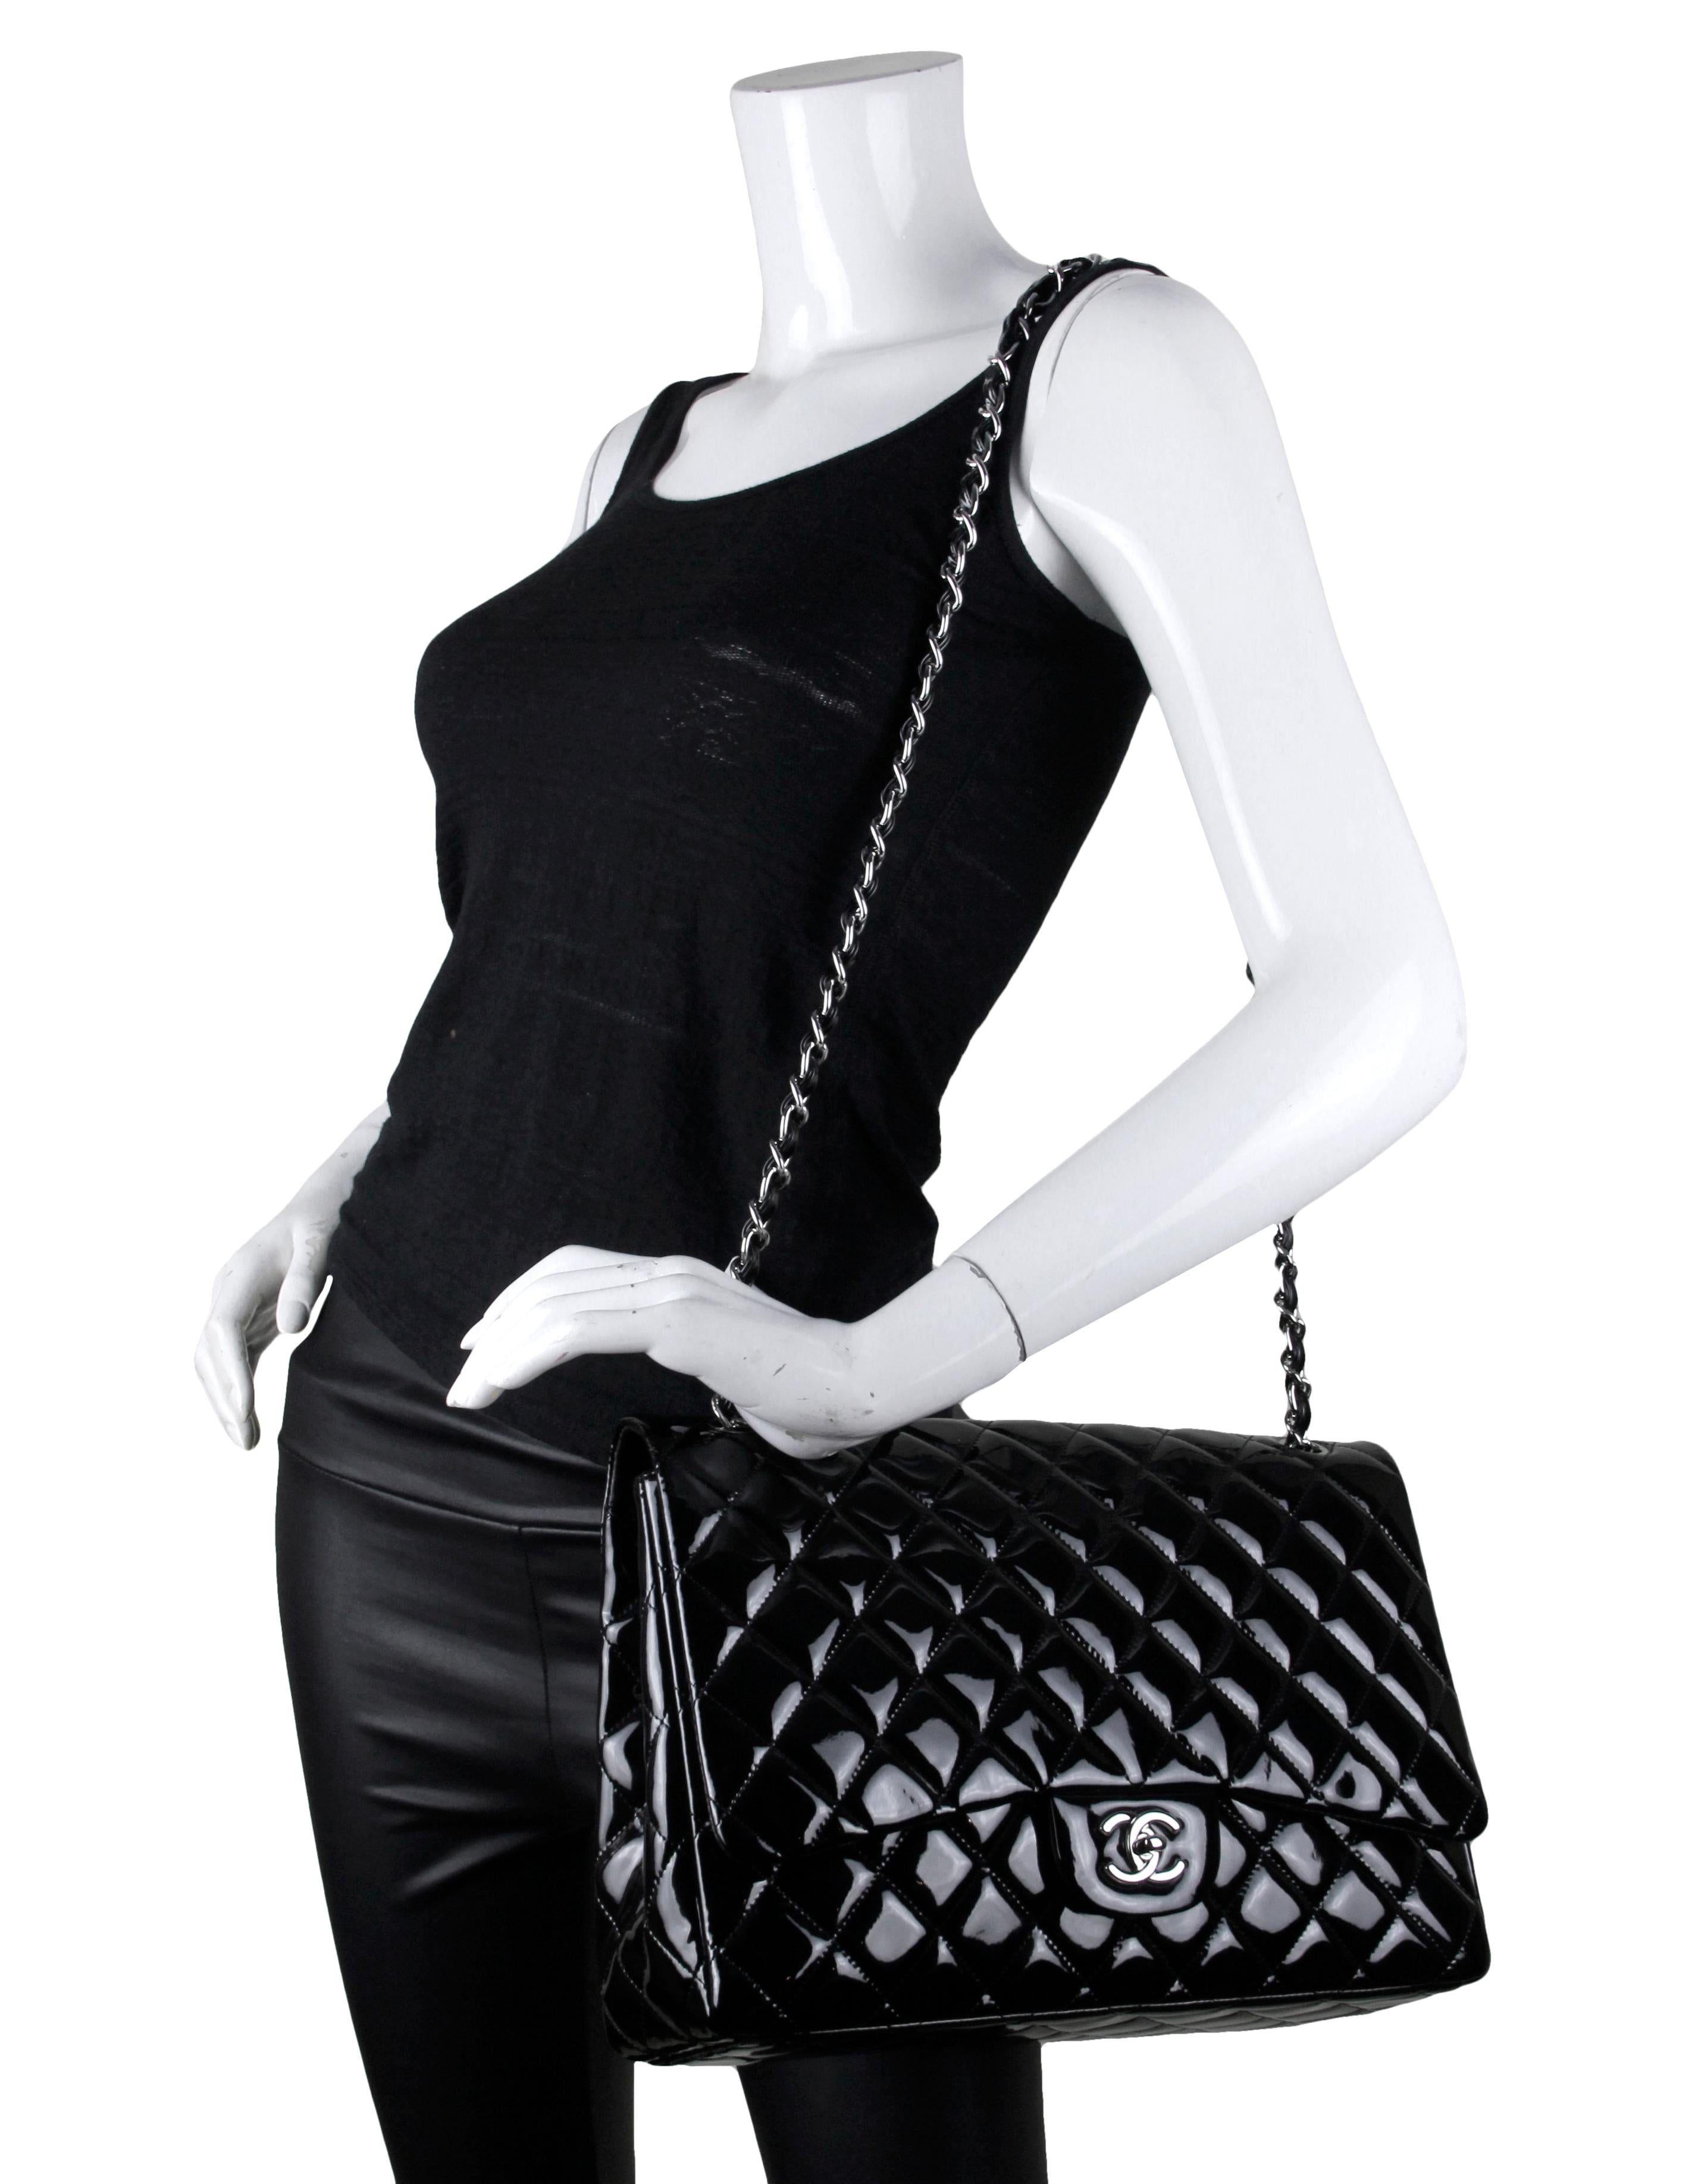 Chanel Black Patent Leather Single Flap Maxi Bag

Made In: Italy
Year of Production: 2009-2010
Color: Black
Hardware: Silvertone
Materials: Patent leather
Lining: Black smooth leather
Closure/Opening: Flap top with CC twistlock
Exterior Pockets: